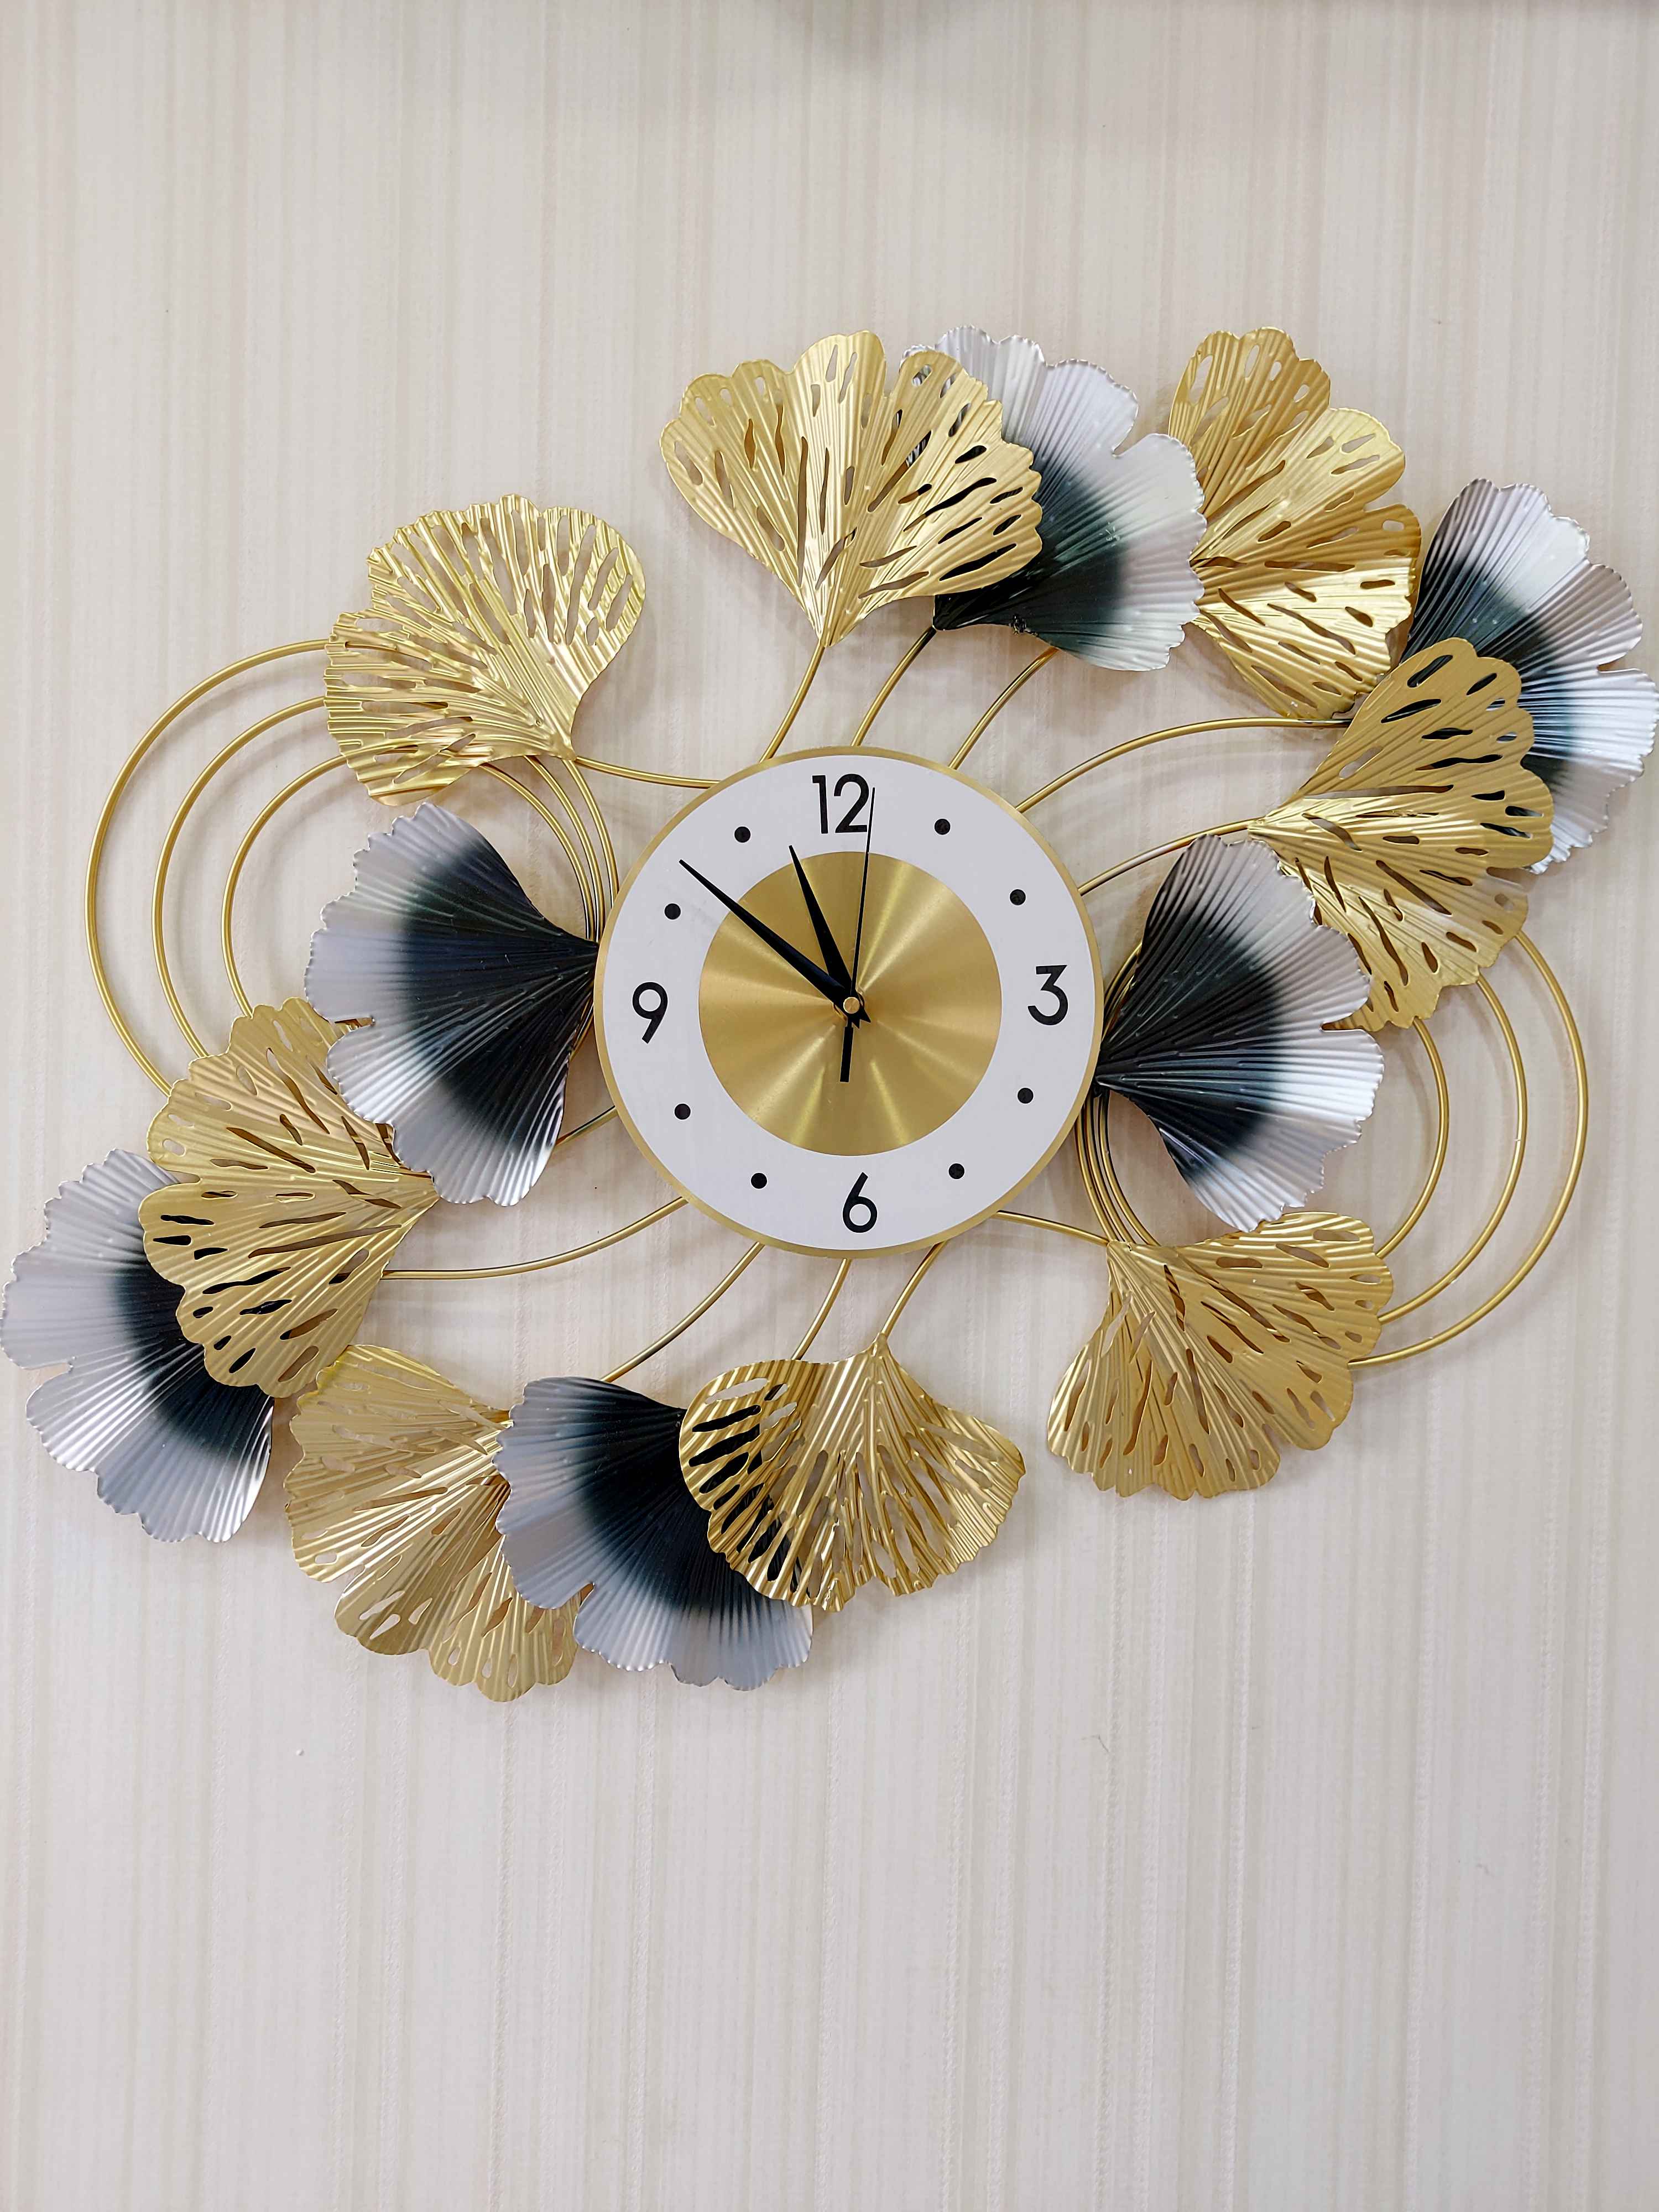 FunkyTradition Modern Minimalist Creative Colorful Leaf Shape Metal Wall Clock , Wall Watch , Wall Decor for Home Office Decor and Gifts 62 CM Tall